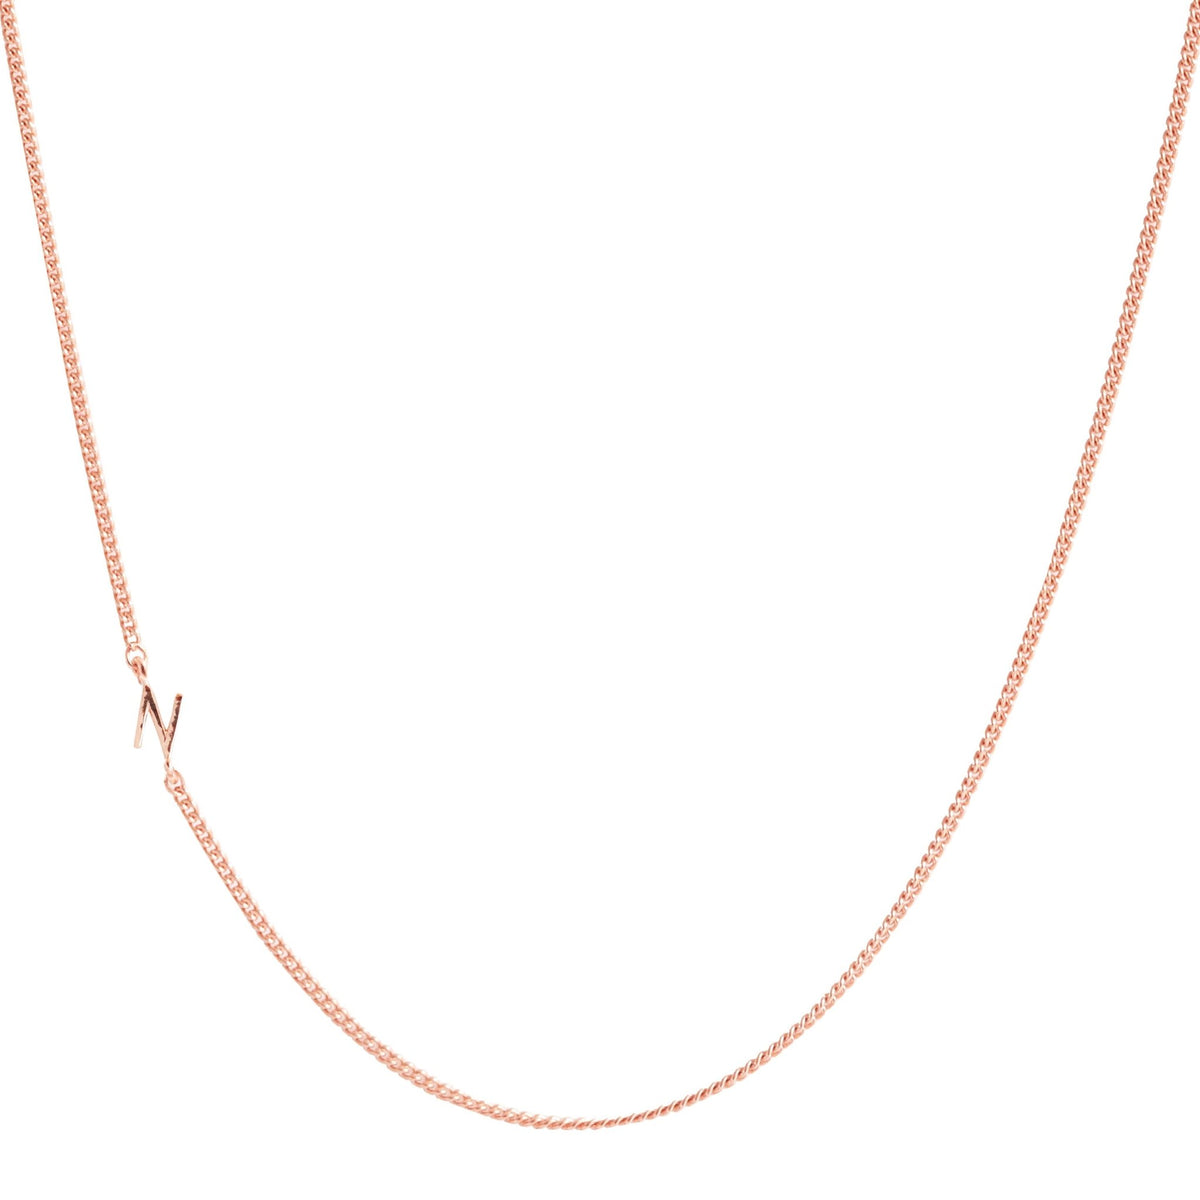 NOTABLE OFFSET INITIAL NECKLACE - N - GOLD, ROSE GOLD, OR SILVER - SO PRETTY CARA COTTER